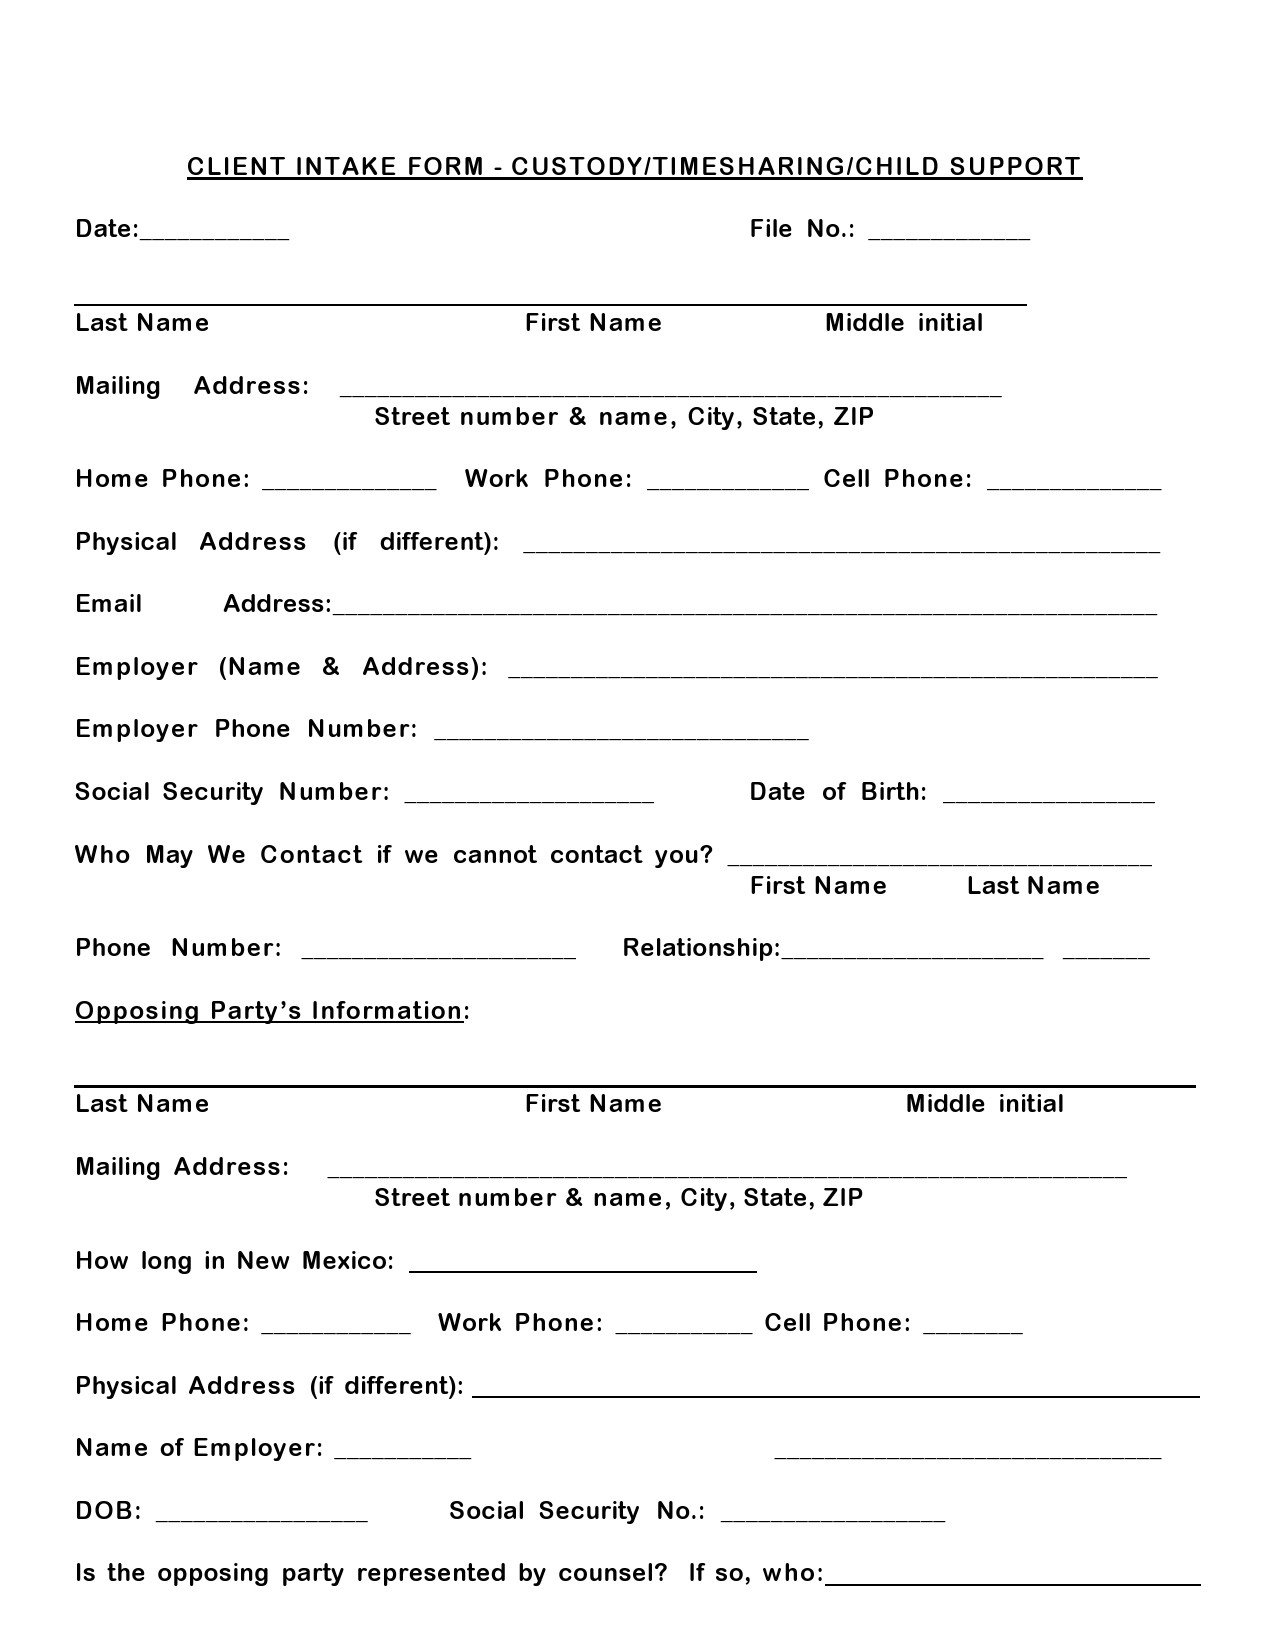 Free client intake form 34